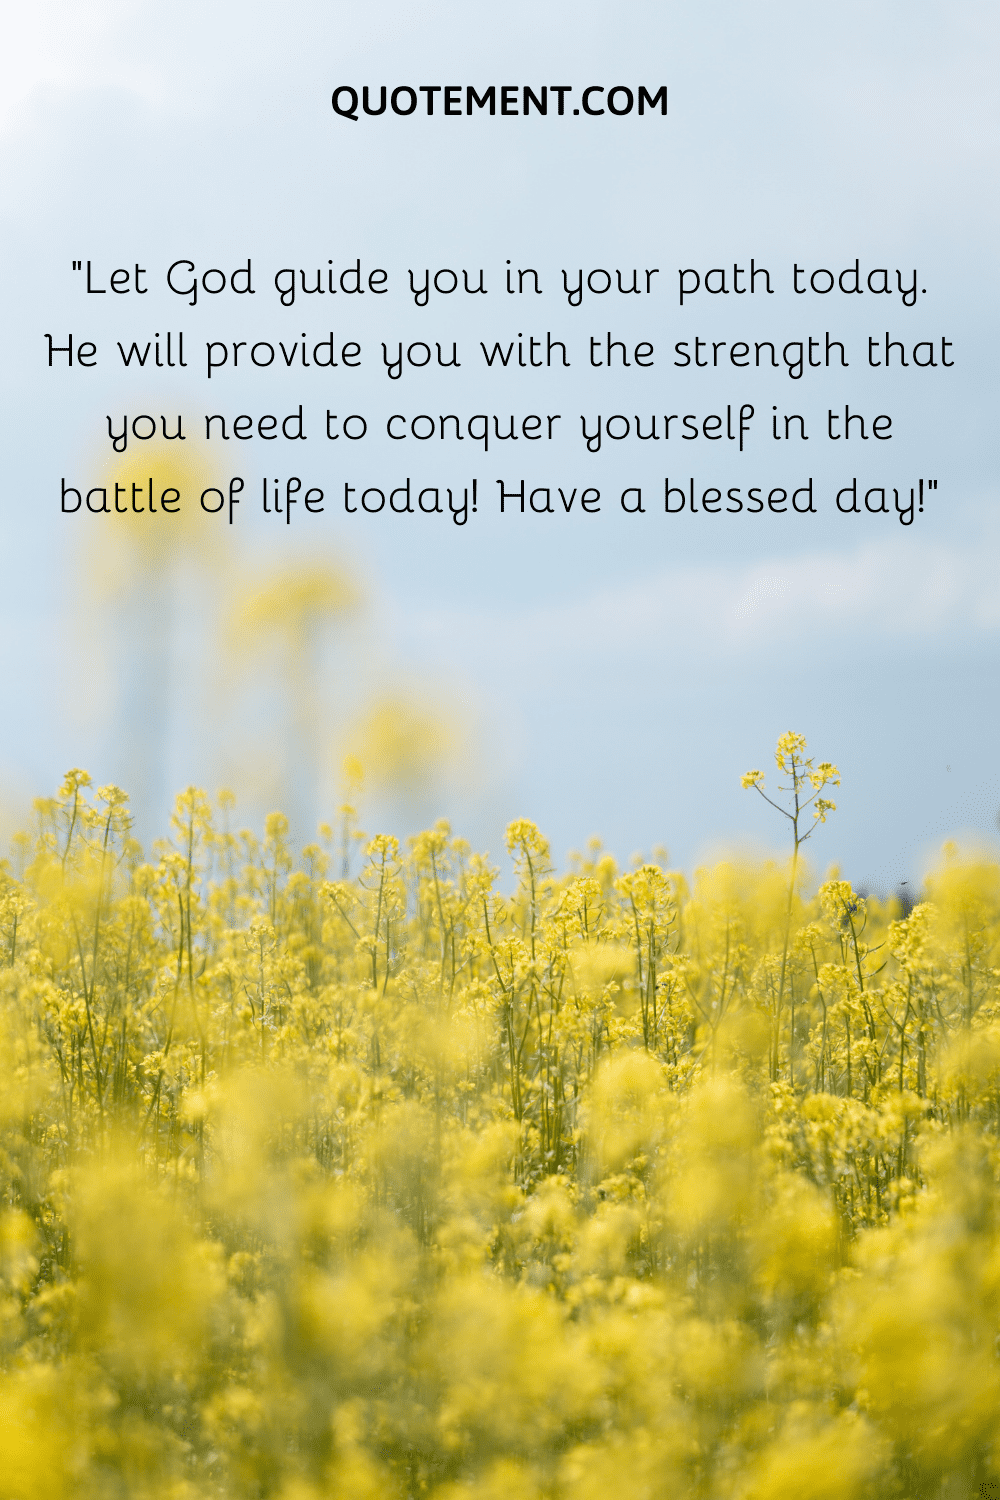 Let God guide you in your path today